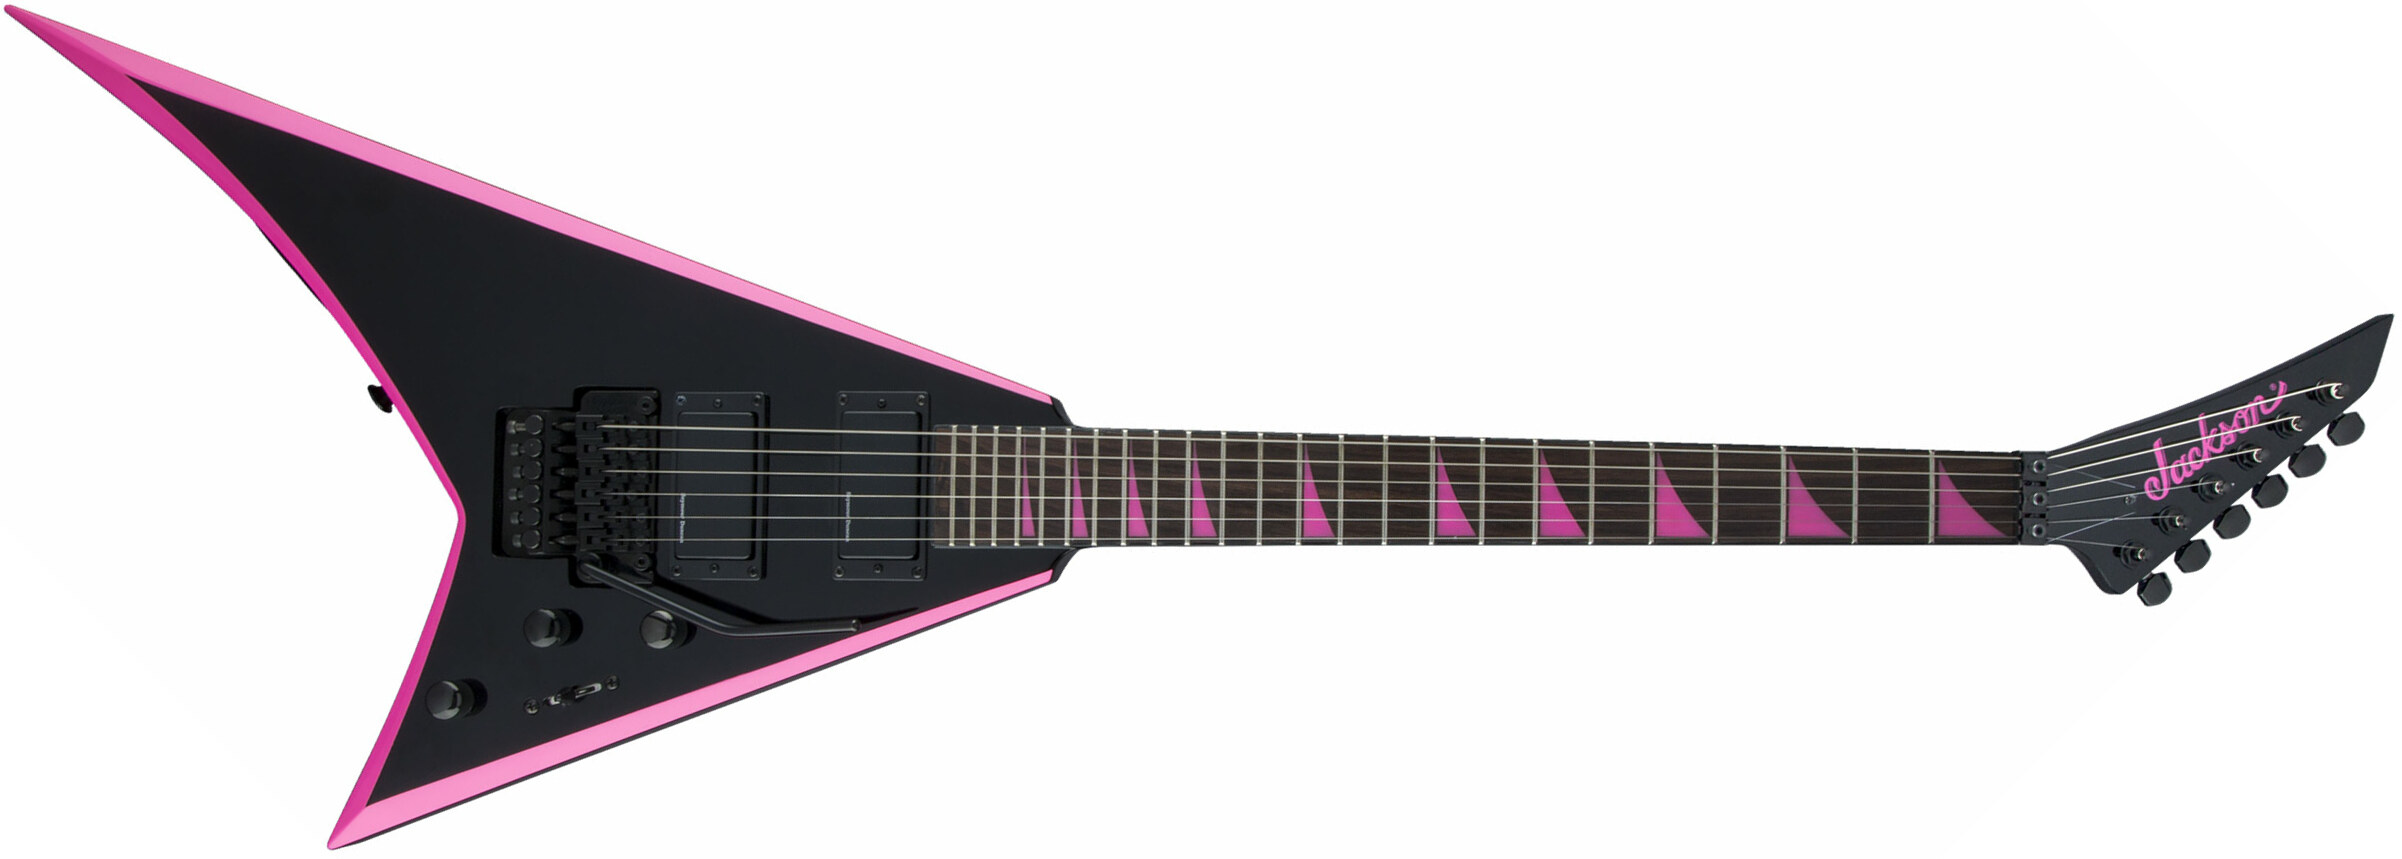 Jackson Rhoads Rrx24 Hh Seymour Duncan Fr Rw - Black With Pink Bevels - Guitarra electrica metalica - Main picture